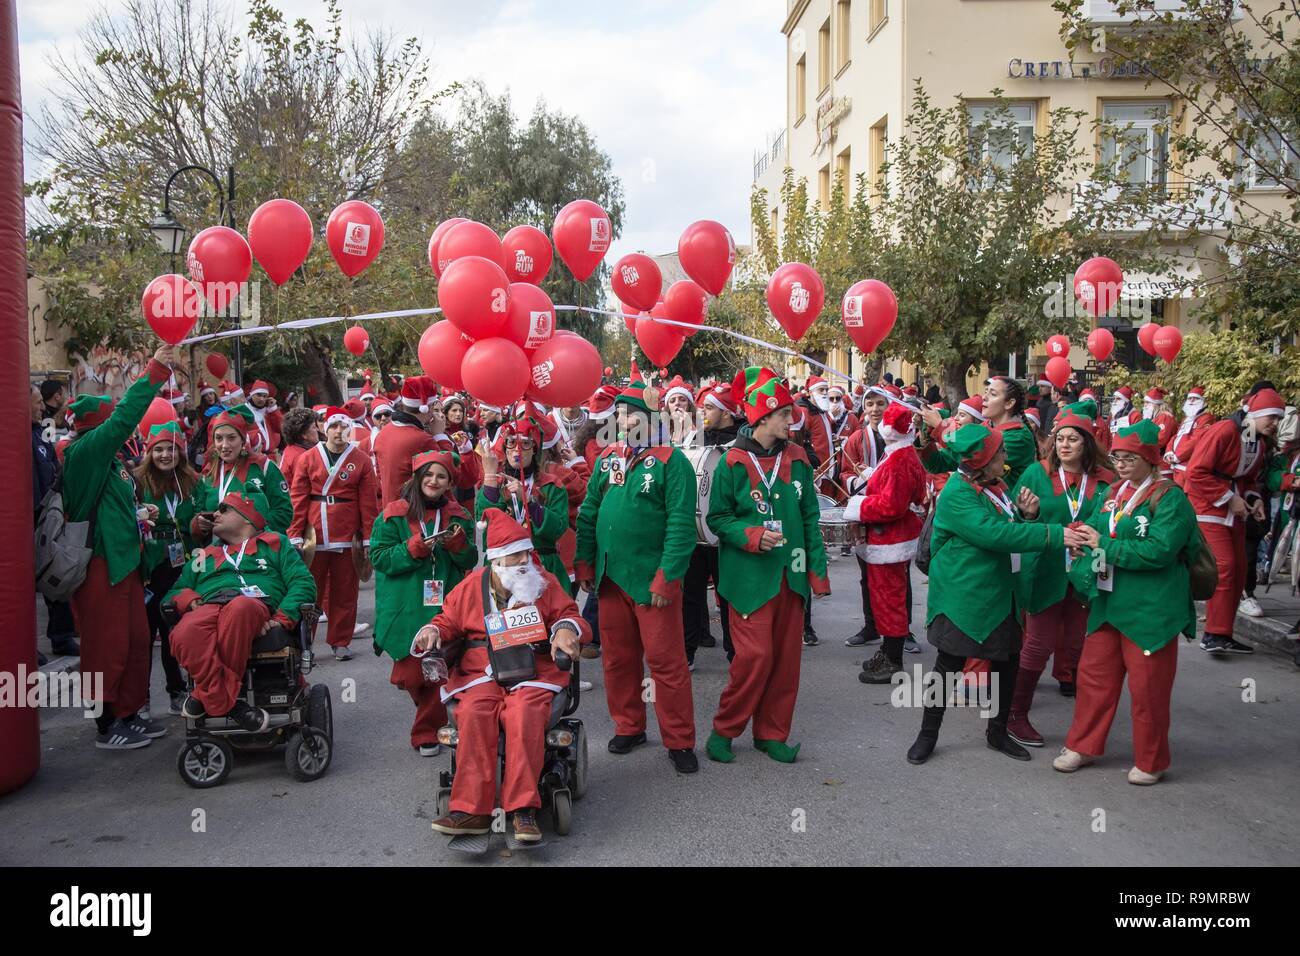 Chania, Greece. 26th Dec, 2018. Participants are seen drinking beer during  the annual Santa Run event.Hundreds of people Wearing Santa Claus costumes  participate at the annual Santa Run in Chania. Credit: Nikolas